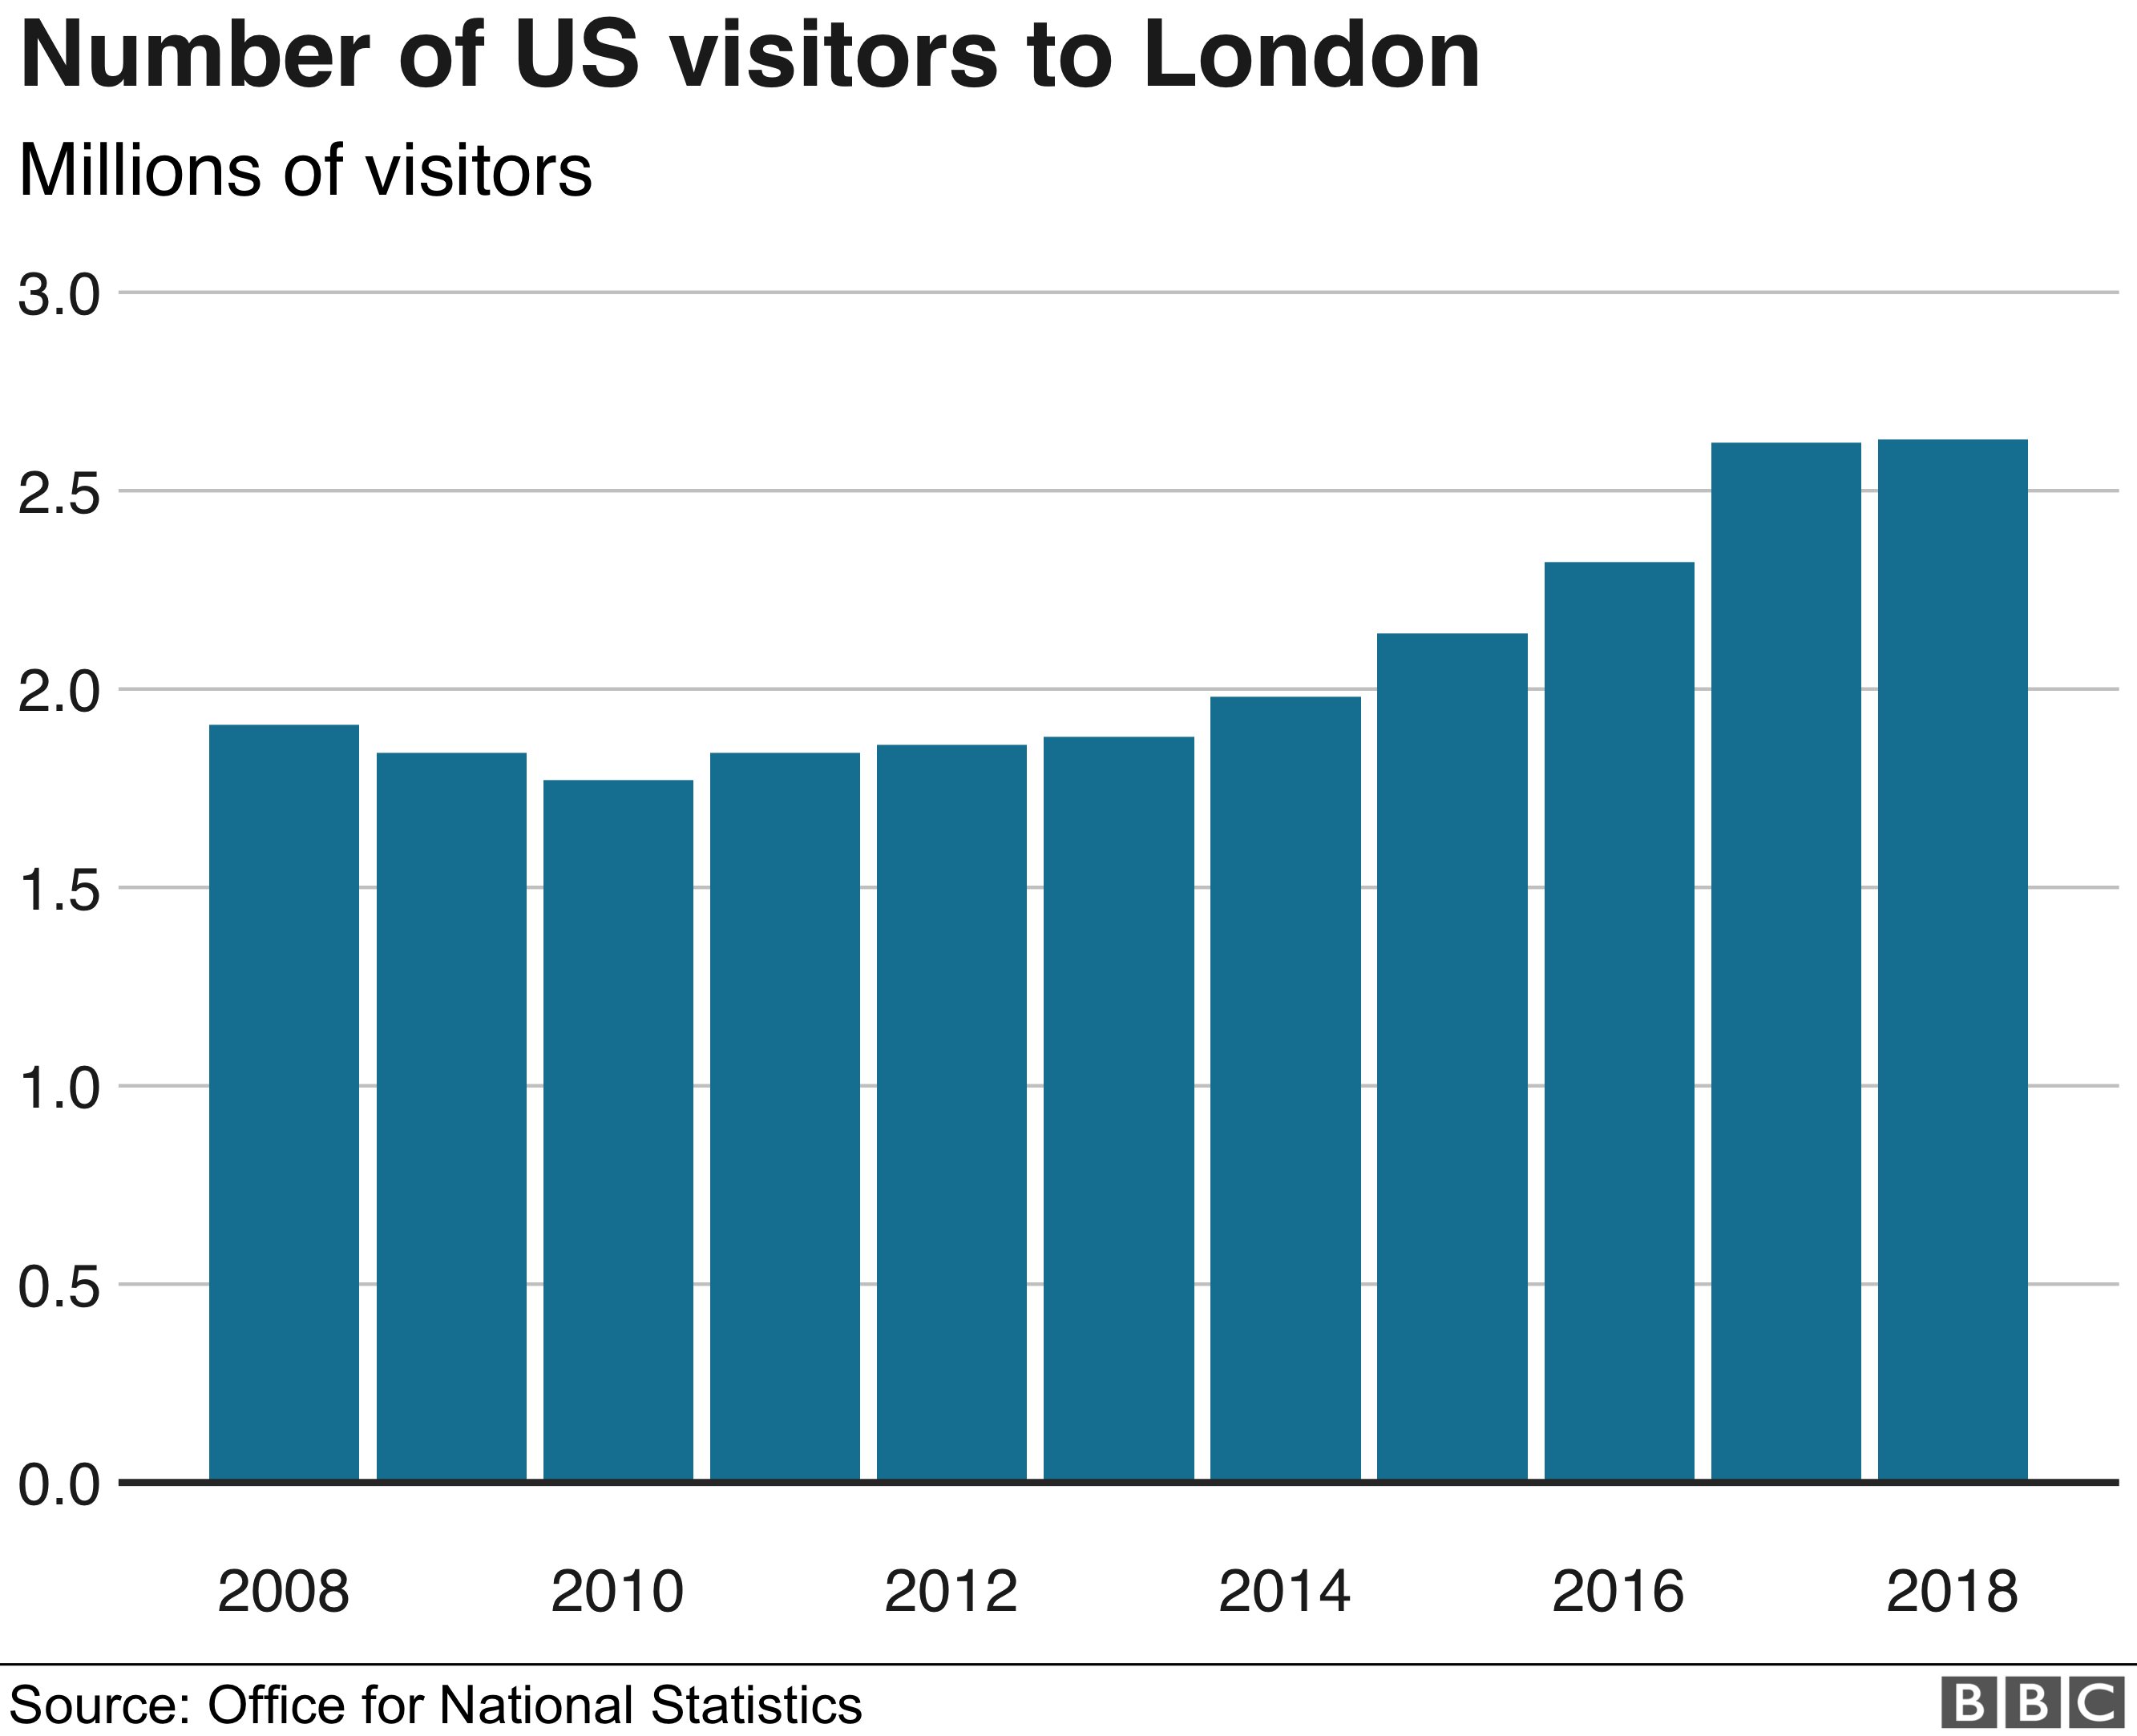 Graph showing an increase in the number of US visitors to London over the last decade